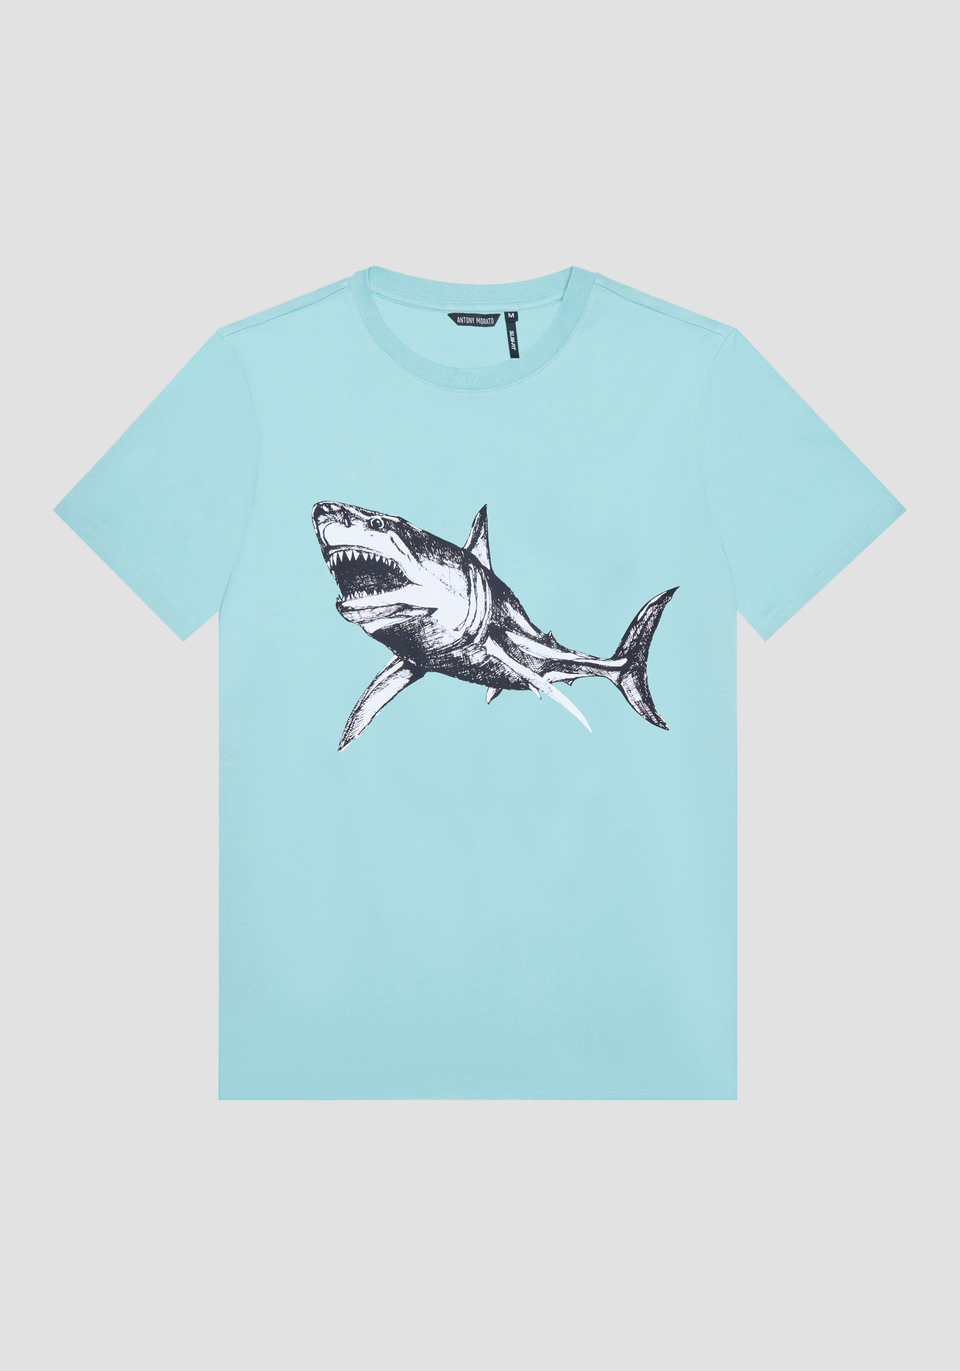 REGULAR-FIT T-SHIRT IN PURE COTTON WITH SHARK PRINT - Antony Morato Online Shop